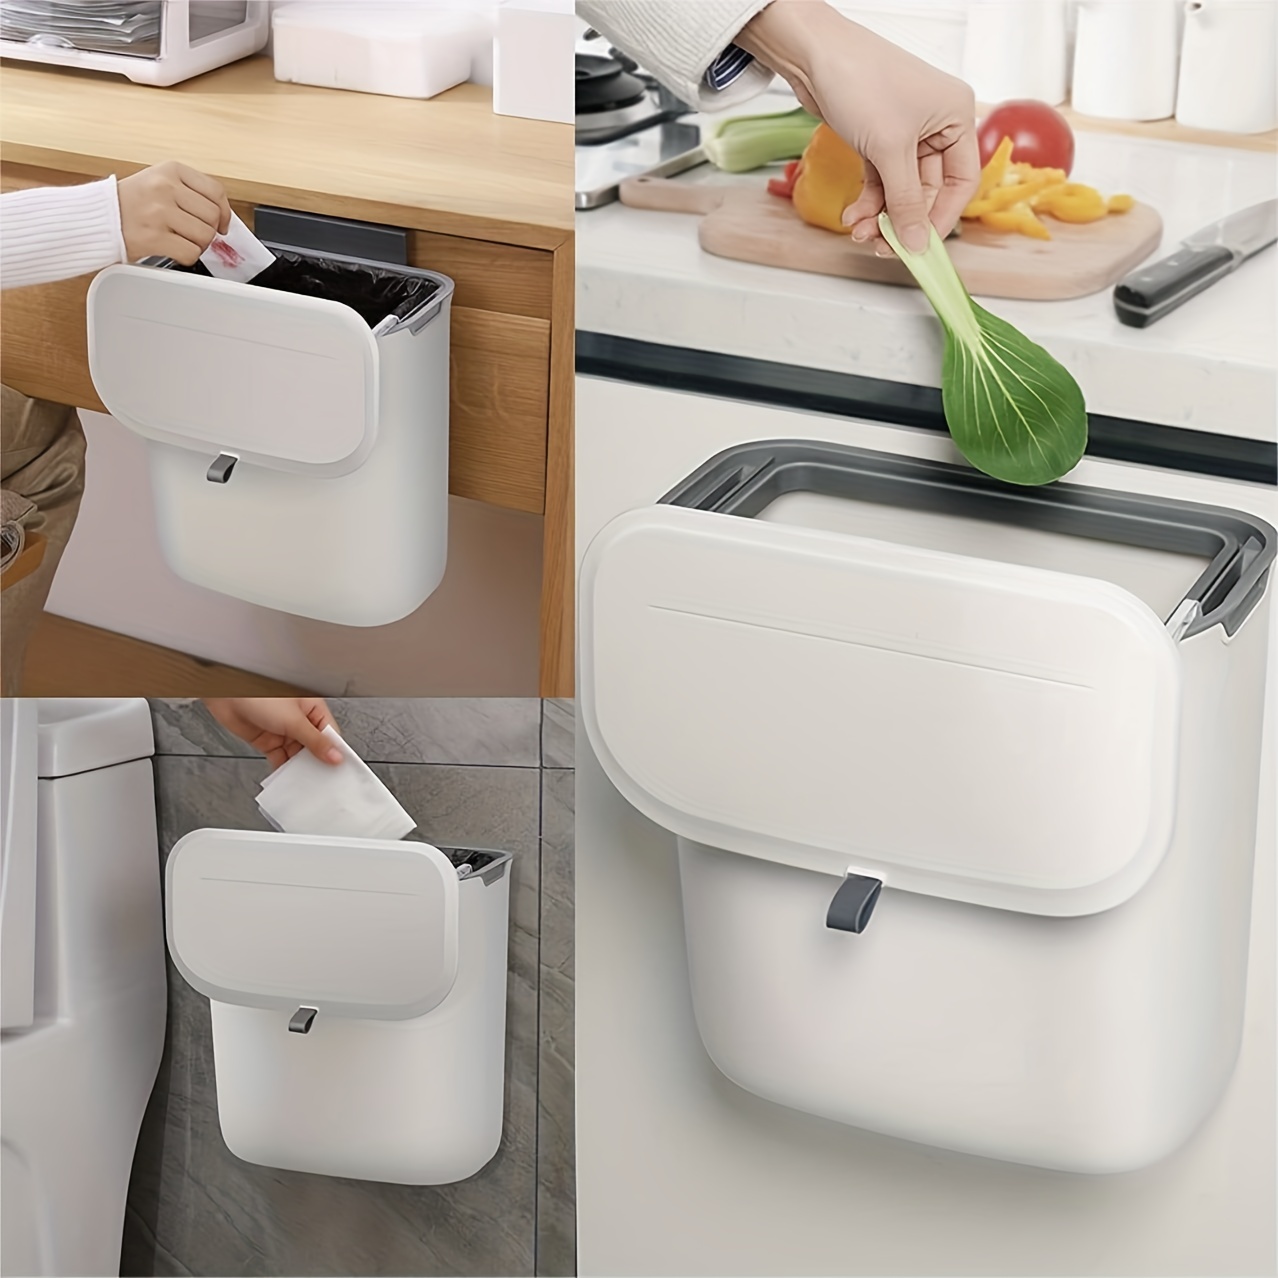 Hanging Small Plastic Trash Can With Lid Under Sink for Kitchen